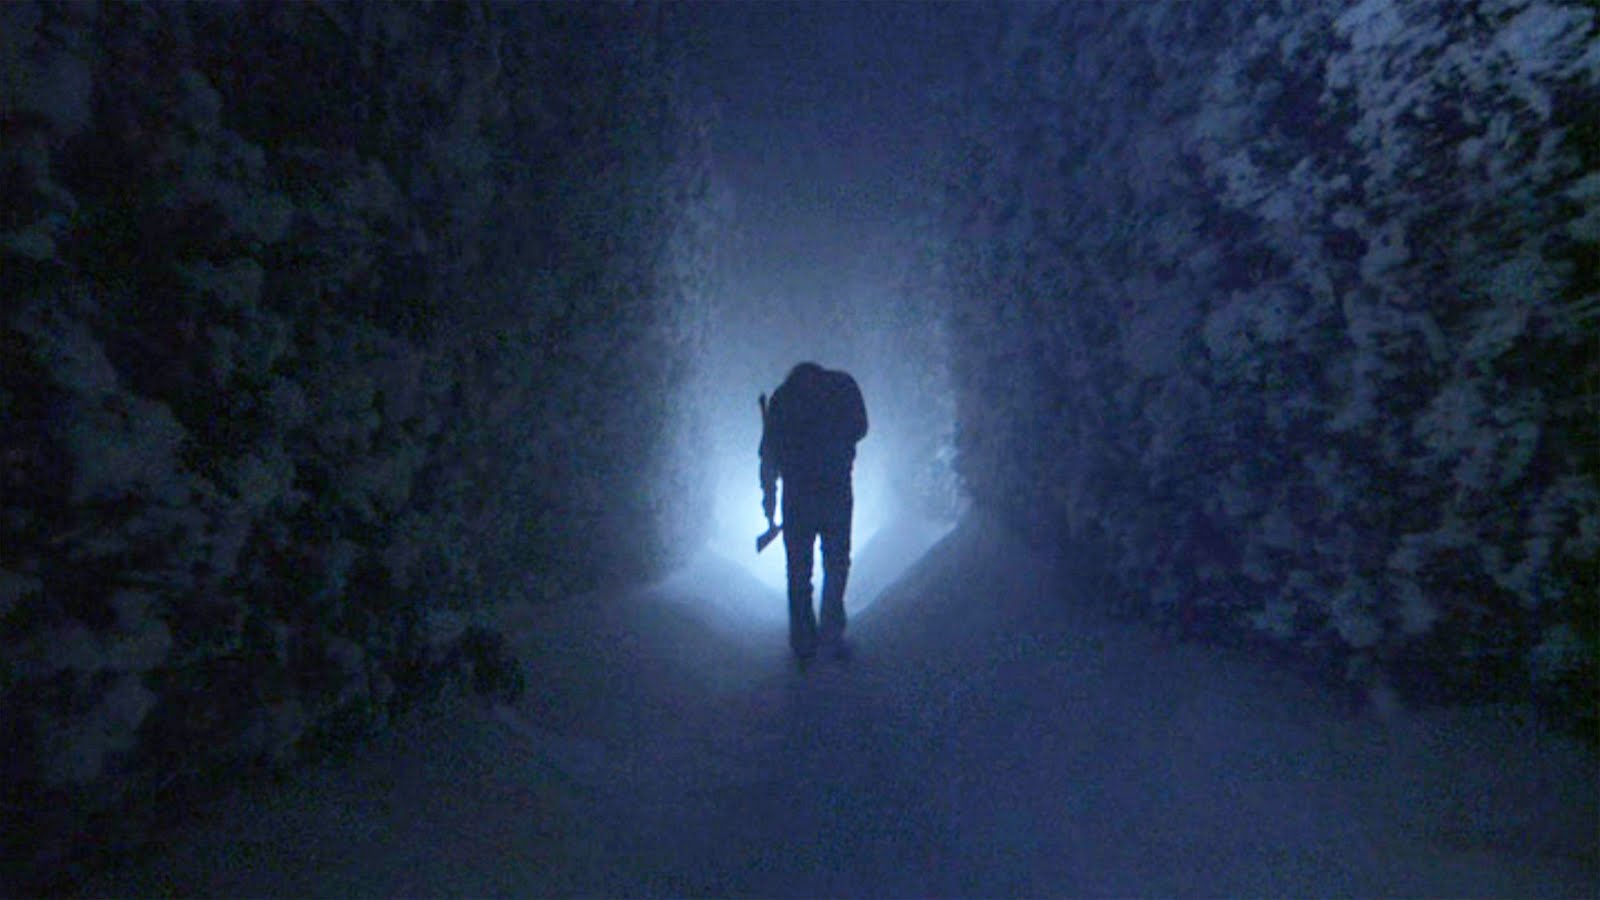 The Hotel From The Shining Wants You To Design Its Scary New Hedge Maze